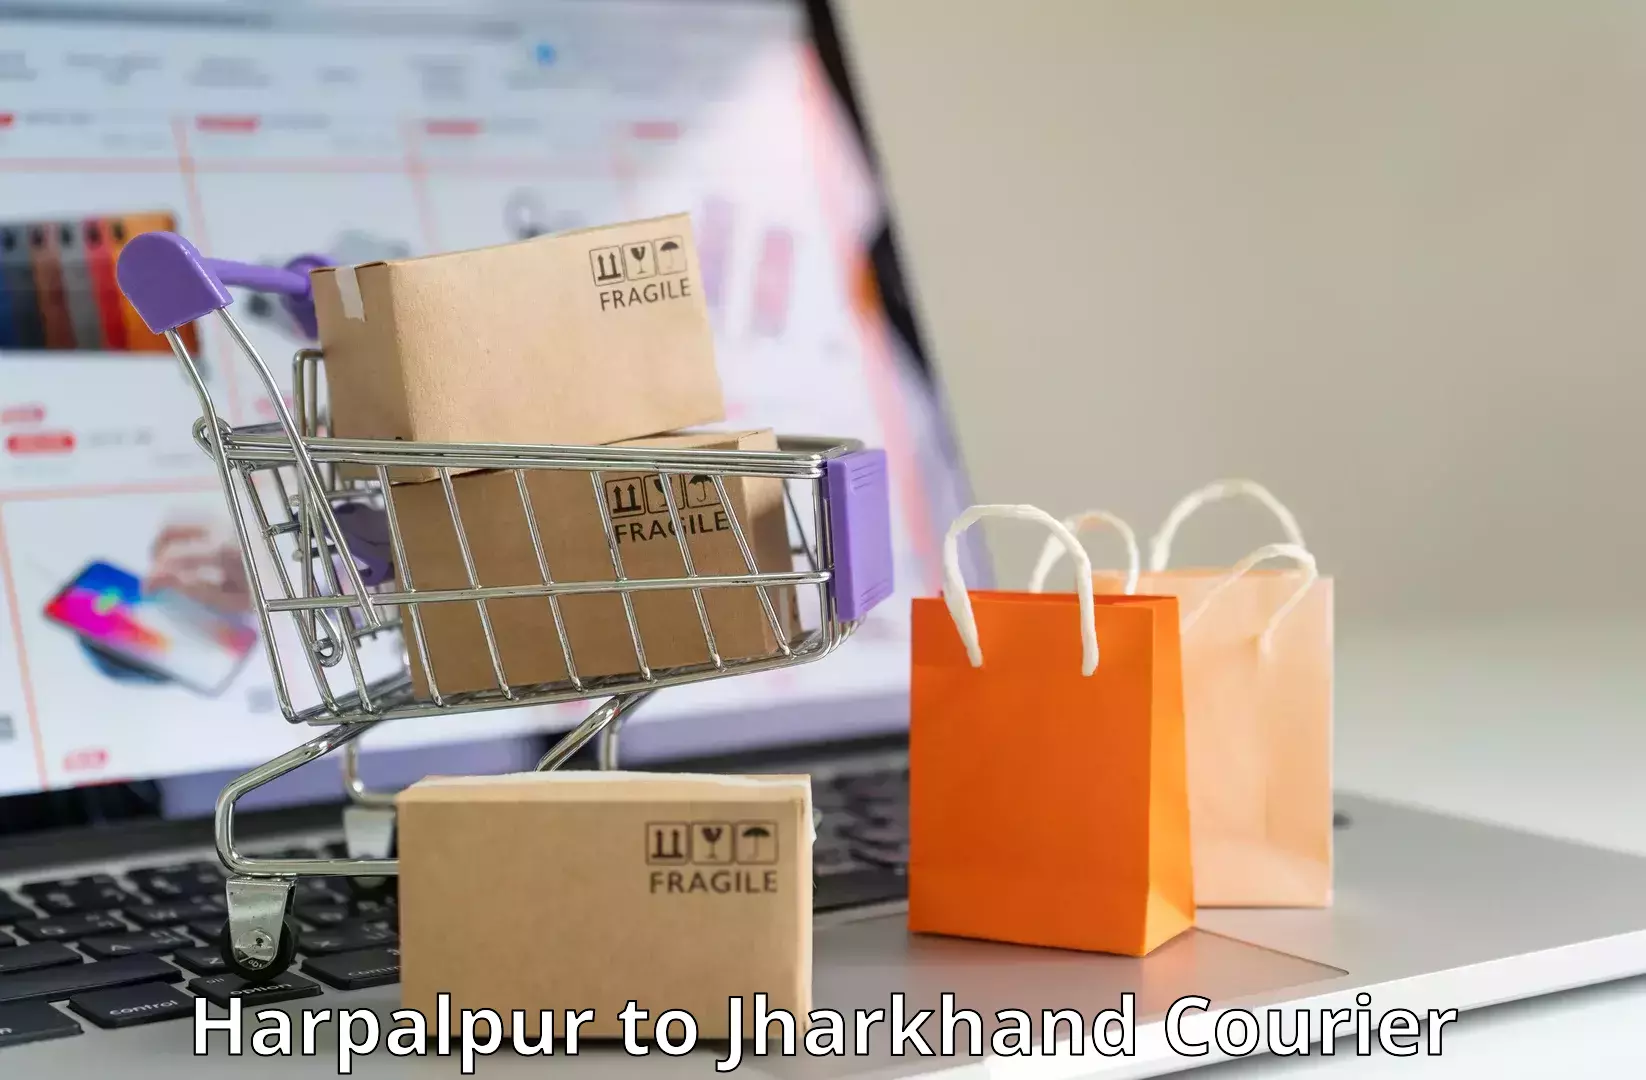 Speedy delivery service Harpalpur to Ranchi